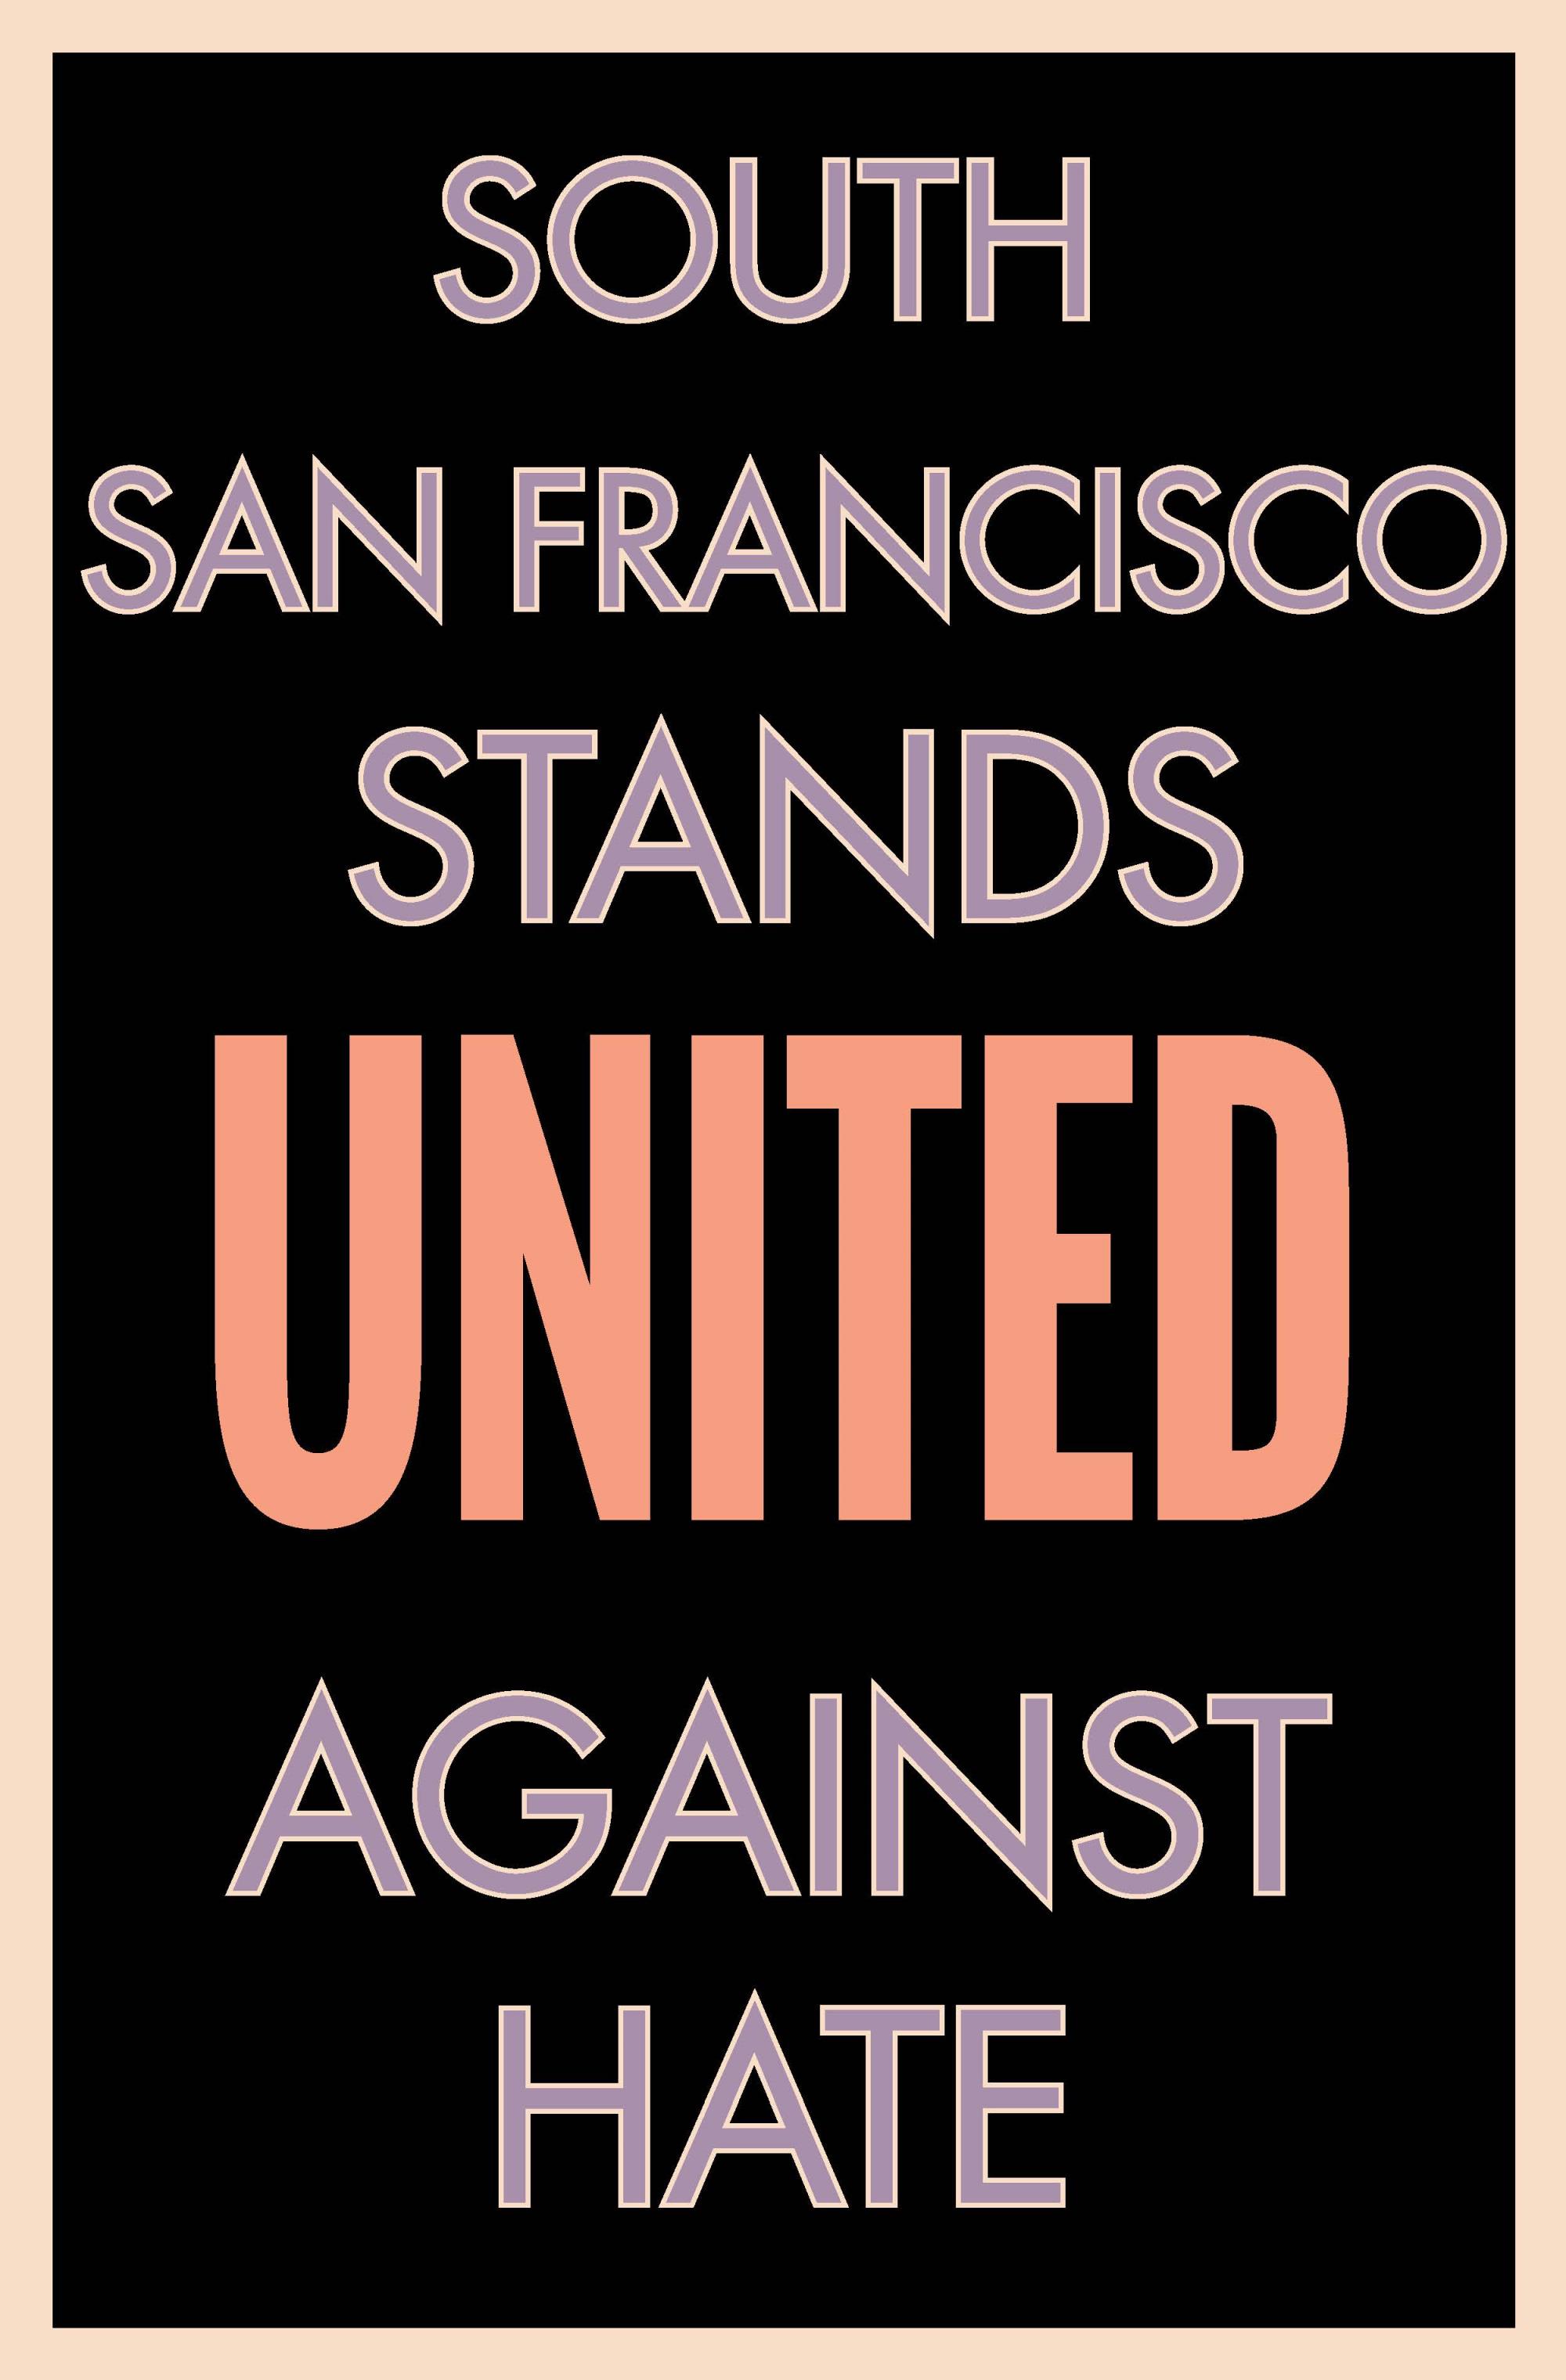 South San Francisco stands united against hate poster